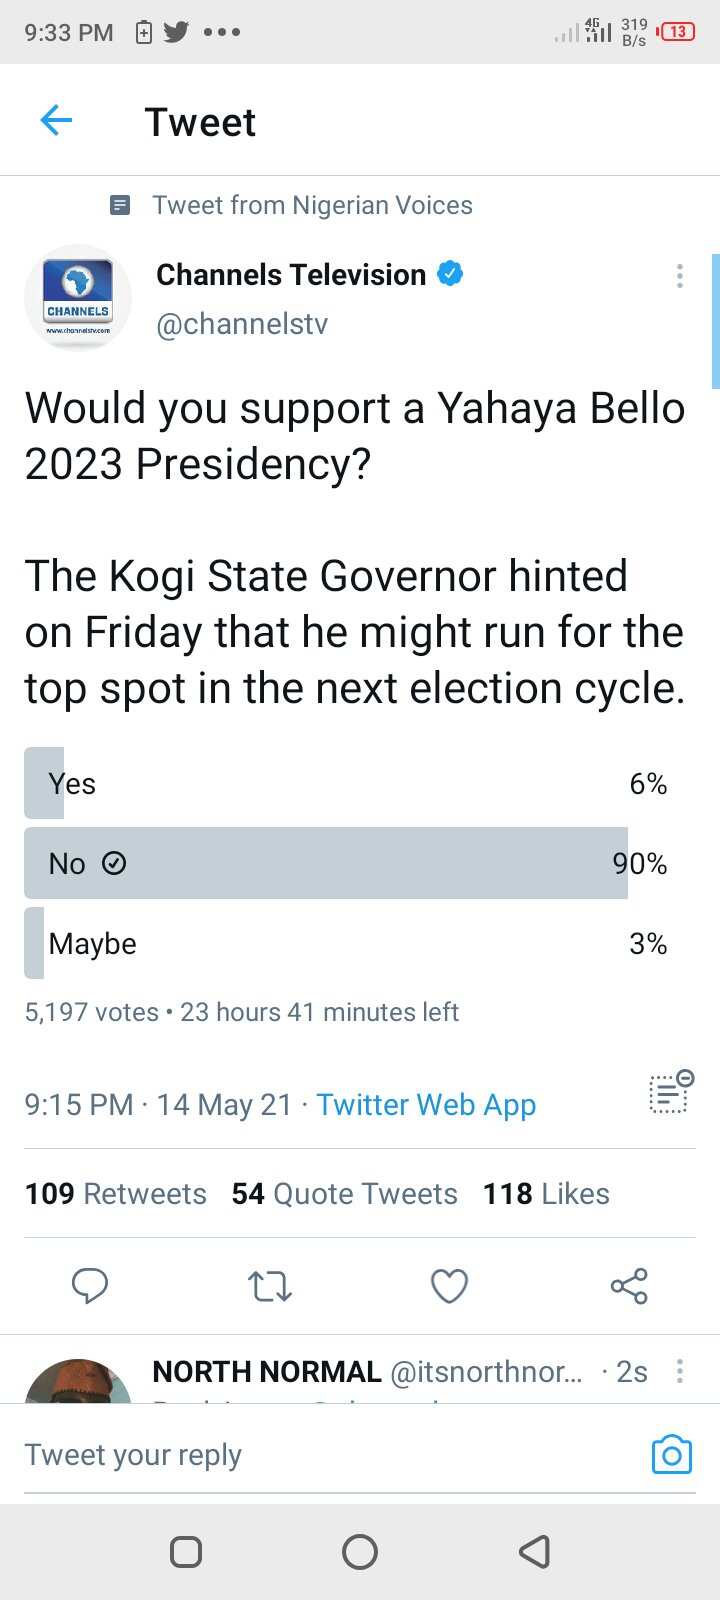 2023: Yahaya Bello scores 6% in presidential poll on Twitter